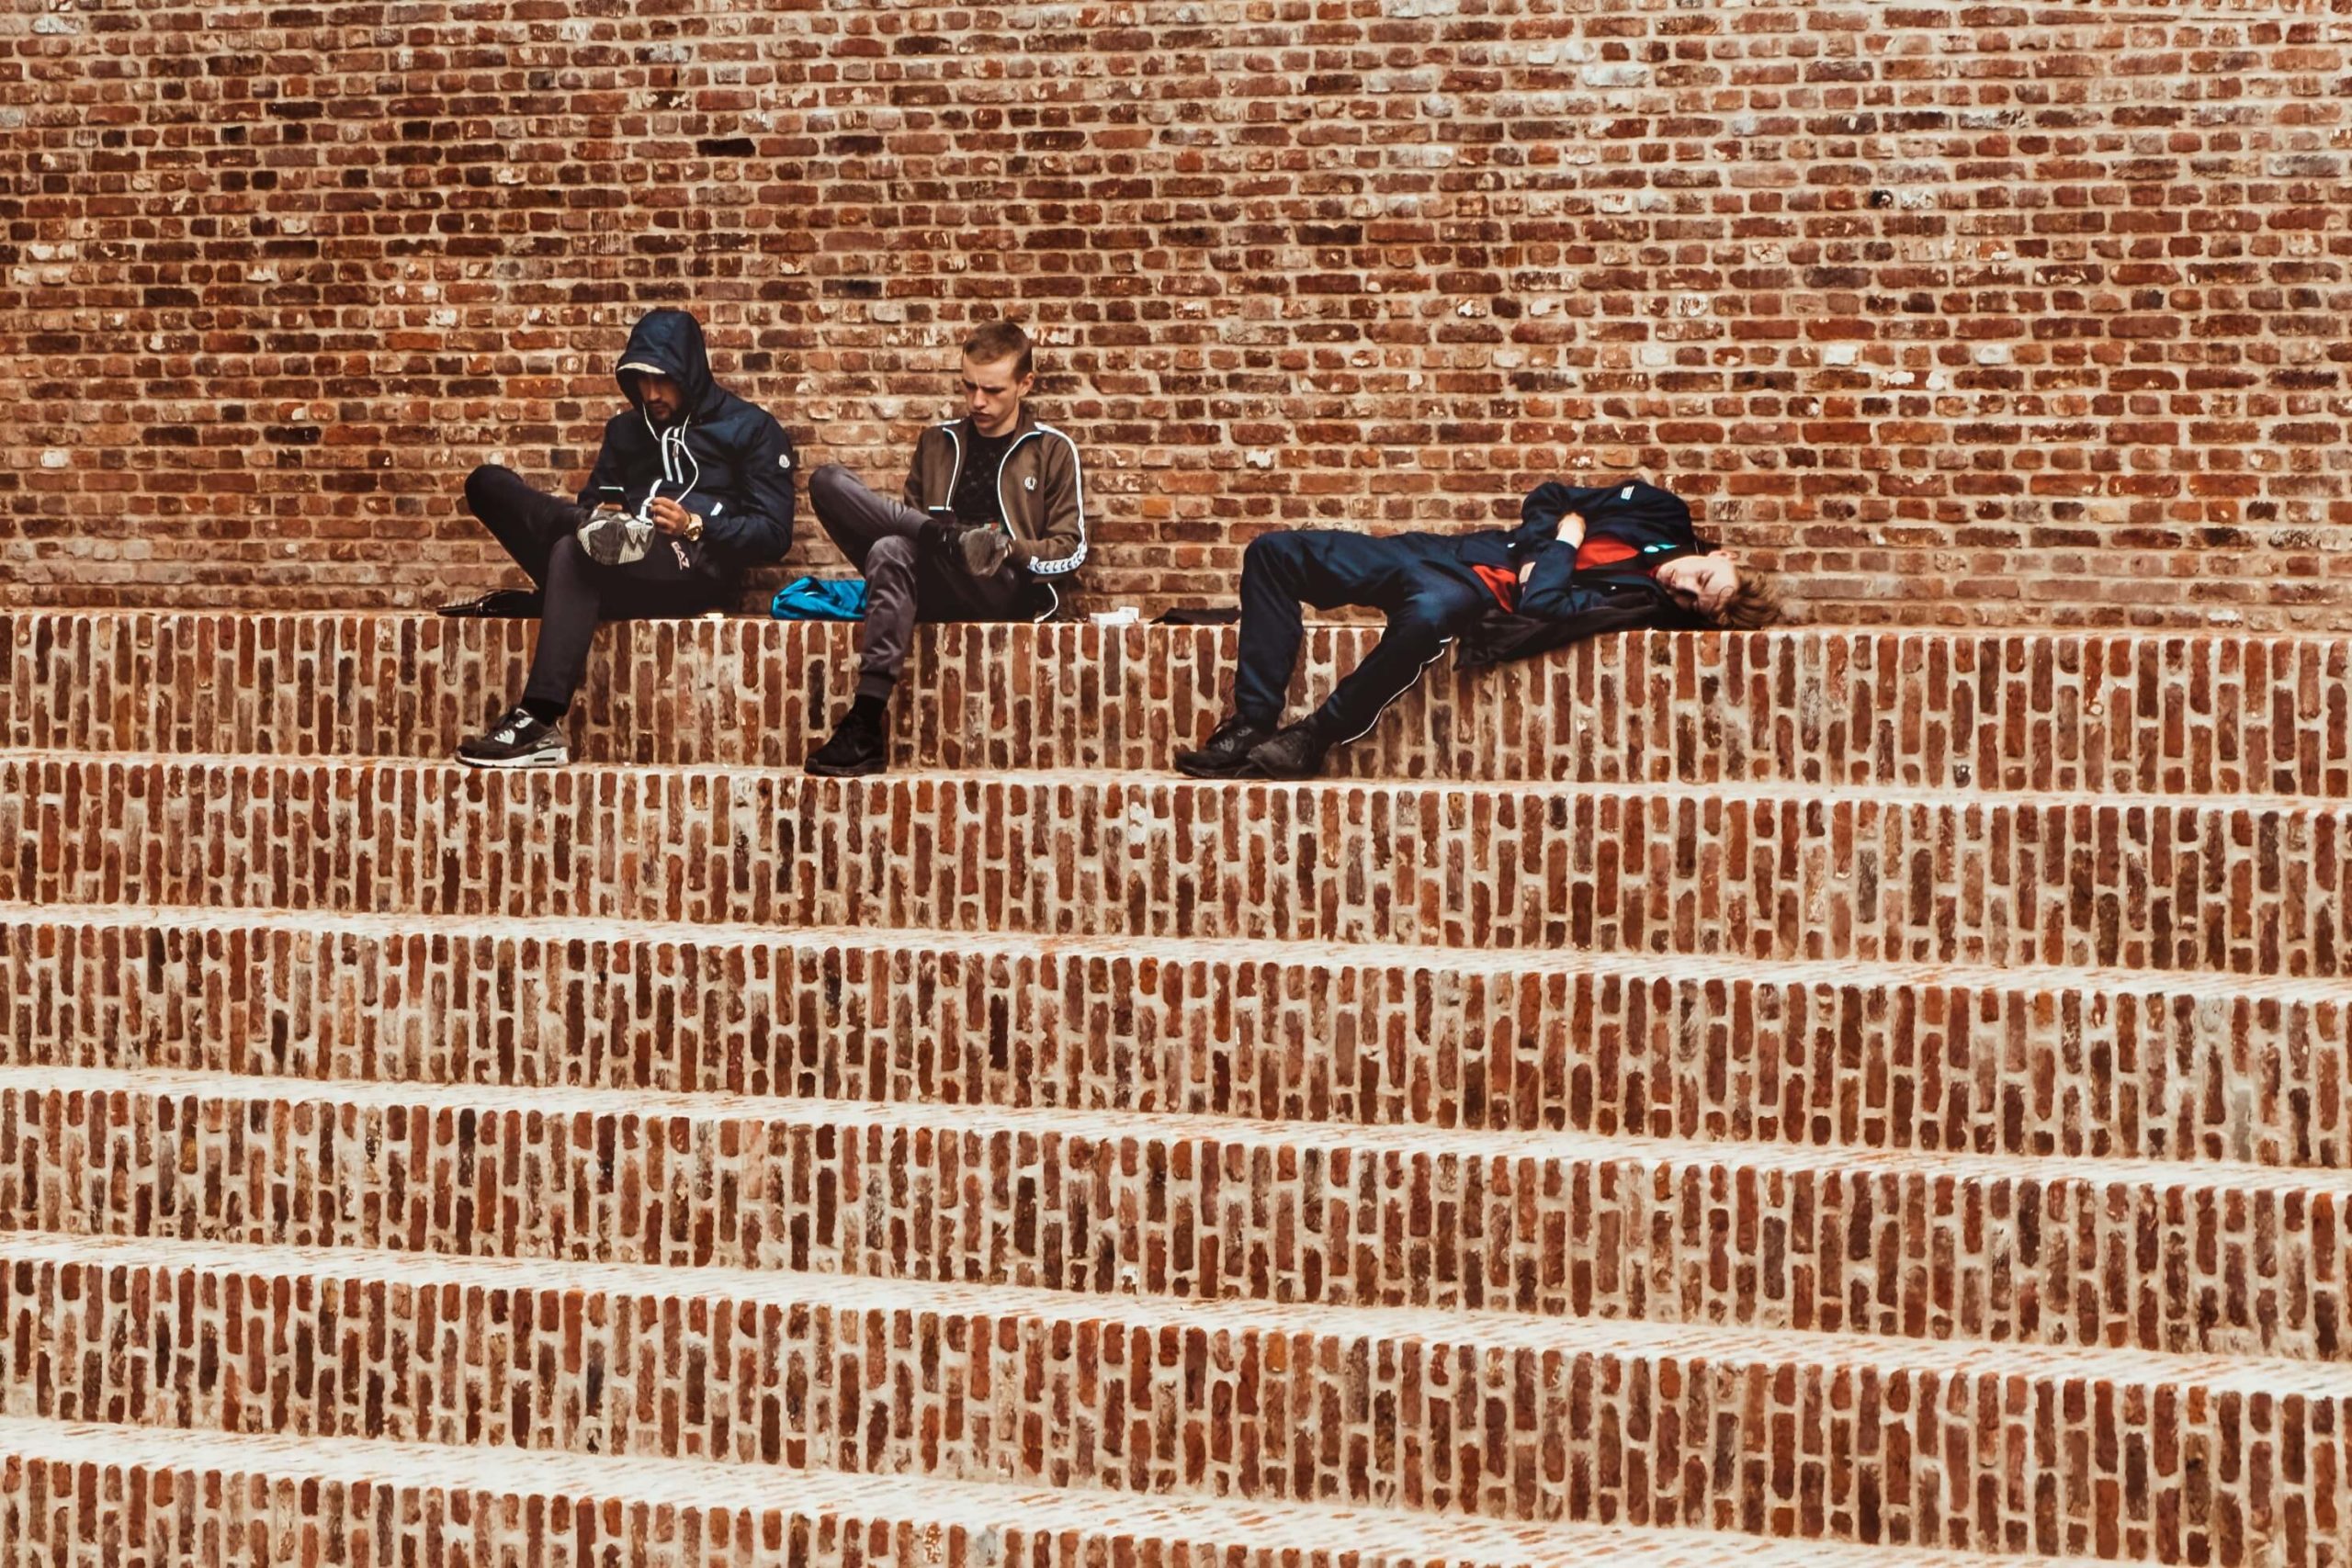 One of three male students asleep on stair steps due to senioritis